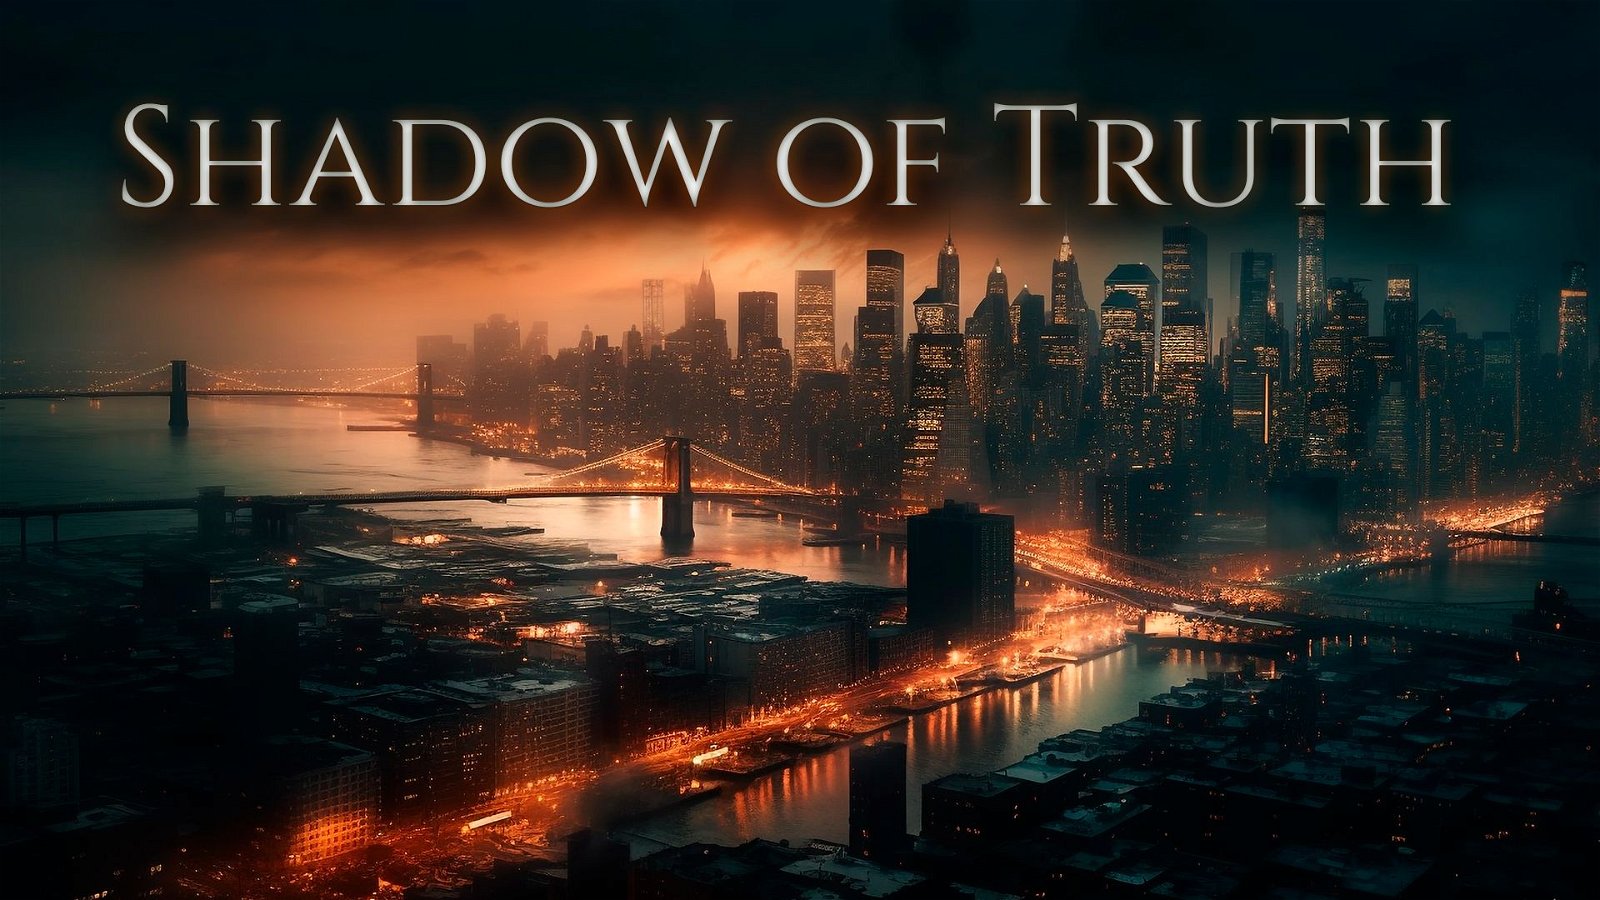 Image of Shadows of Truth